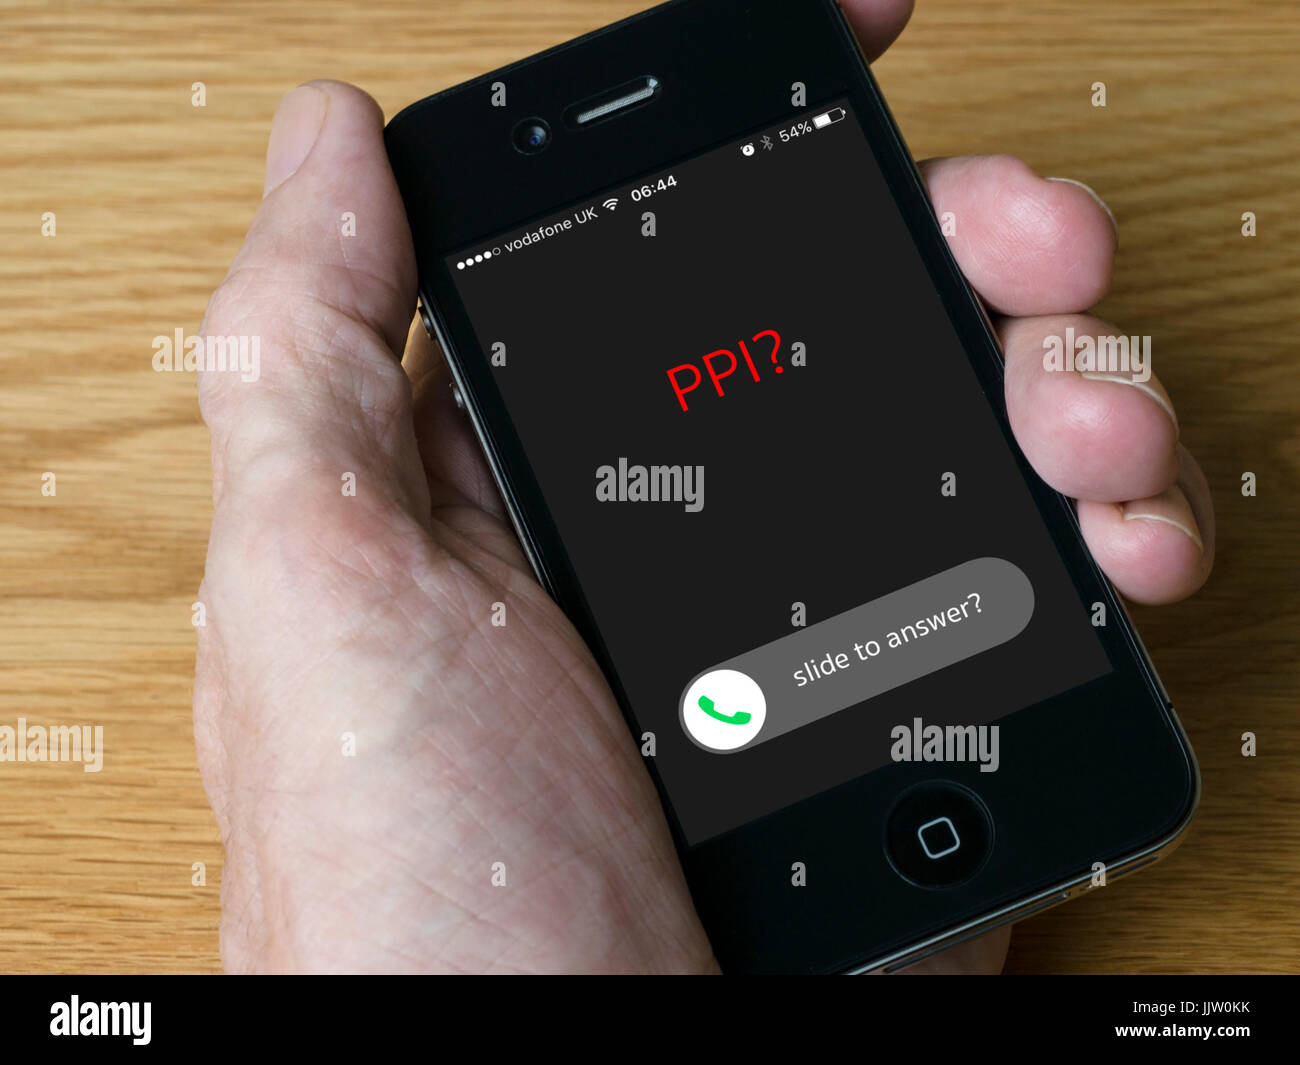 Concept image - Incoming nuisance phone call about PPI on handheld iPhone mobile phone display Stock Photo